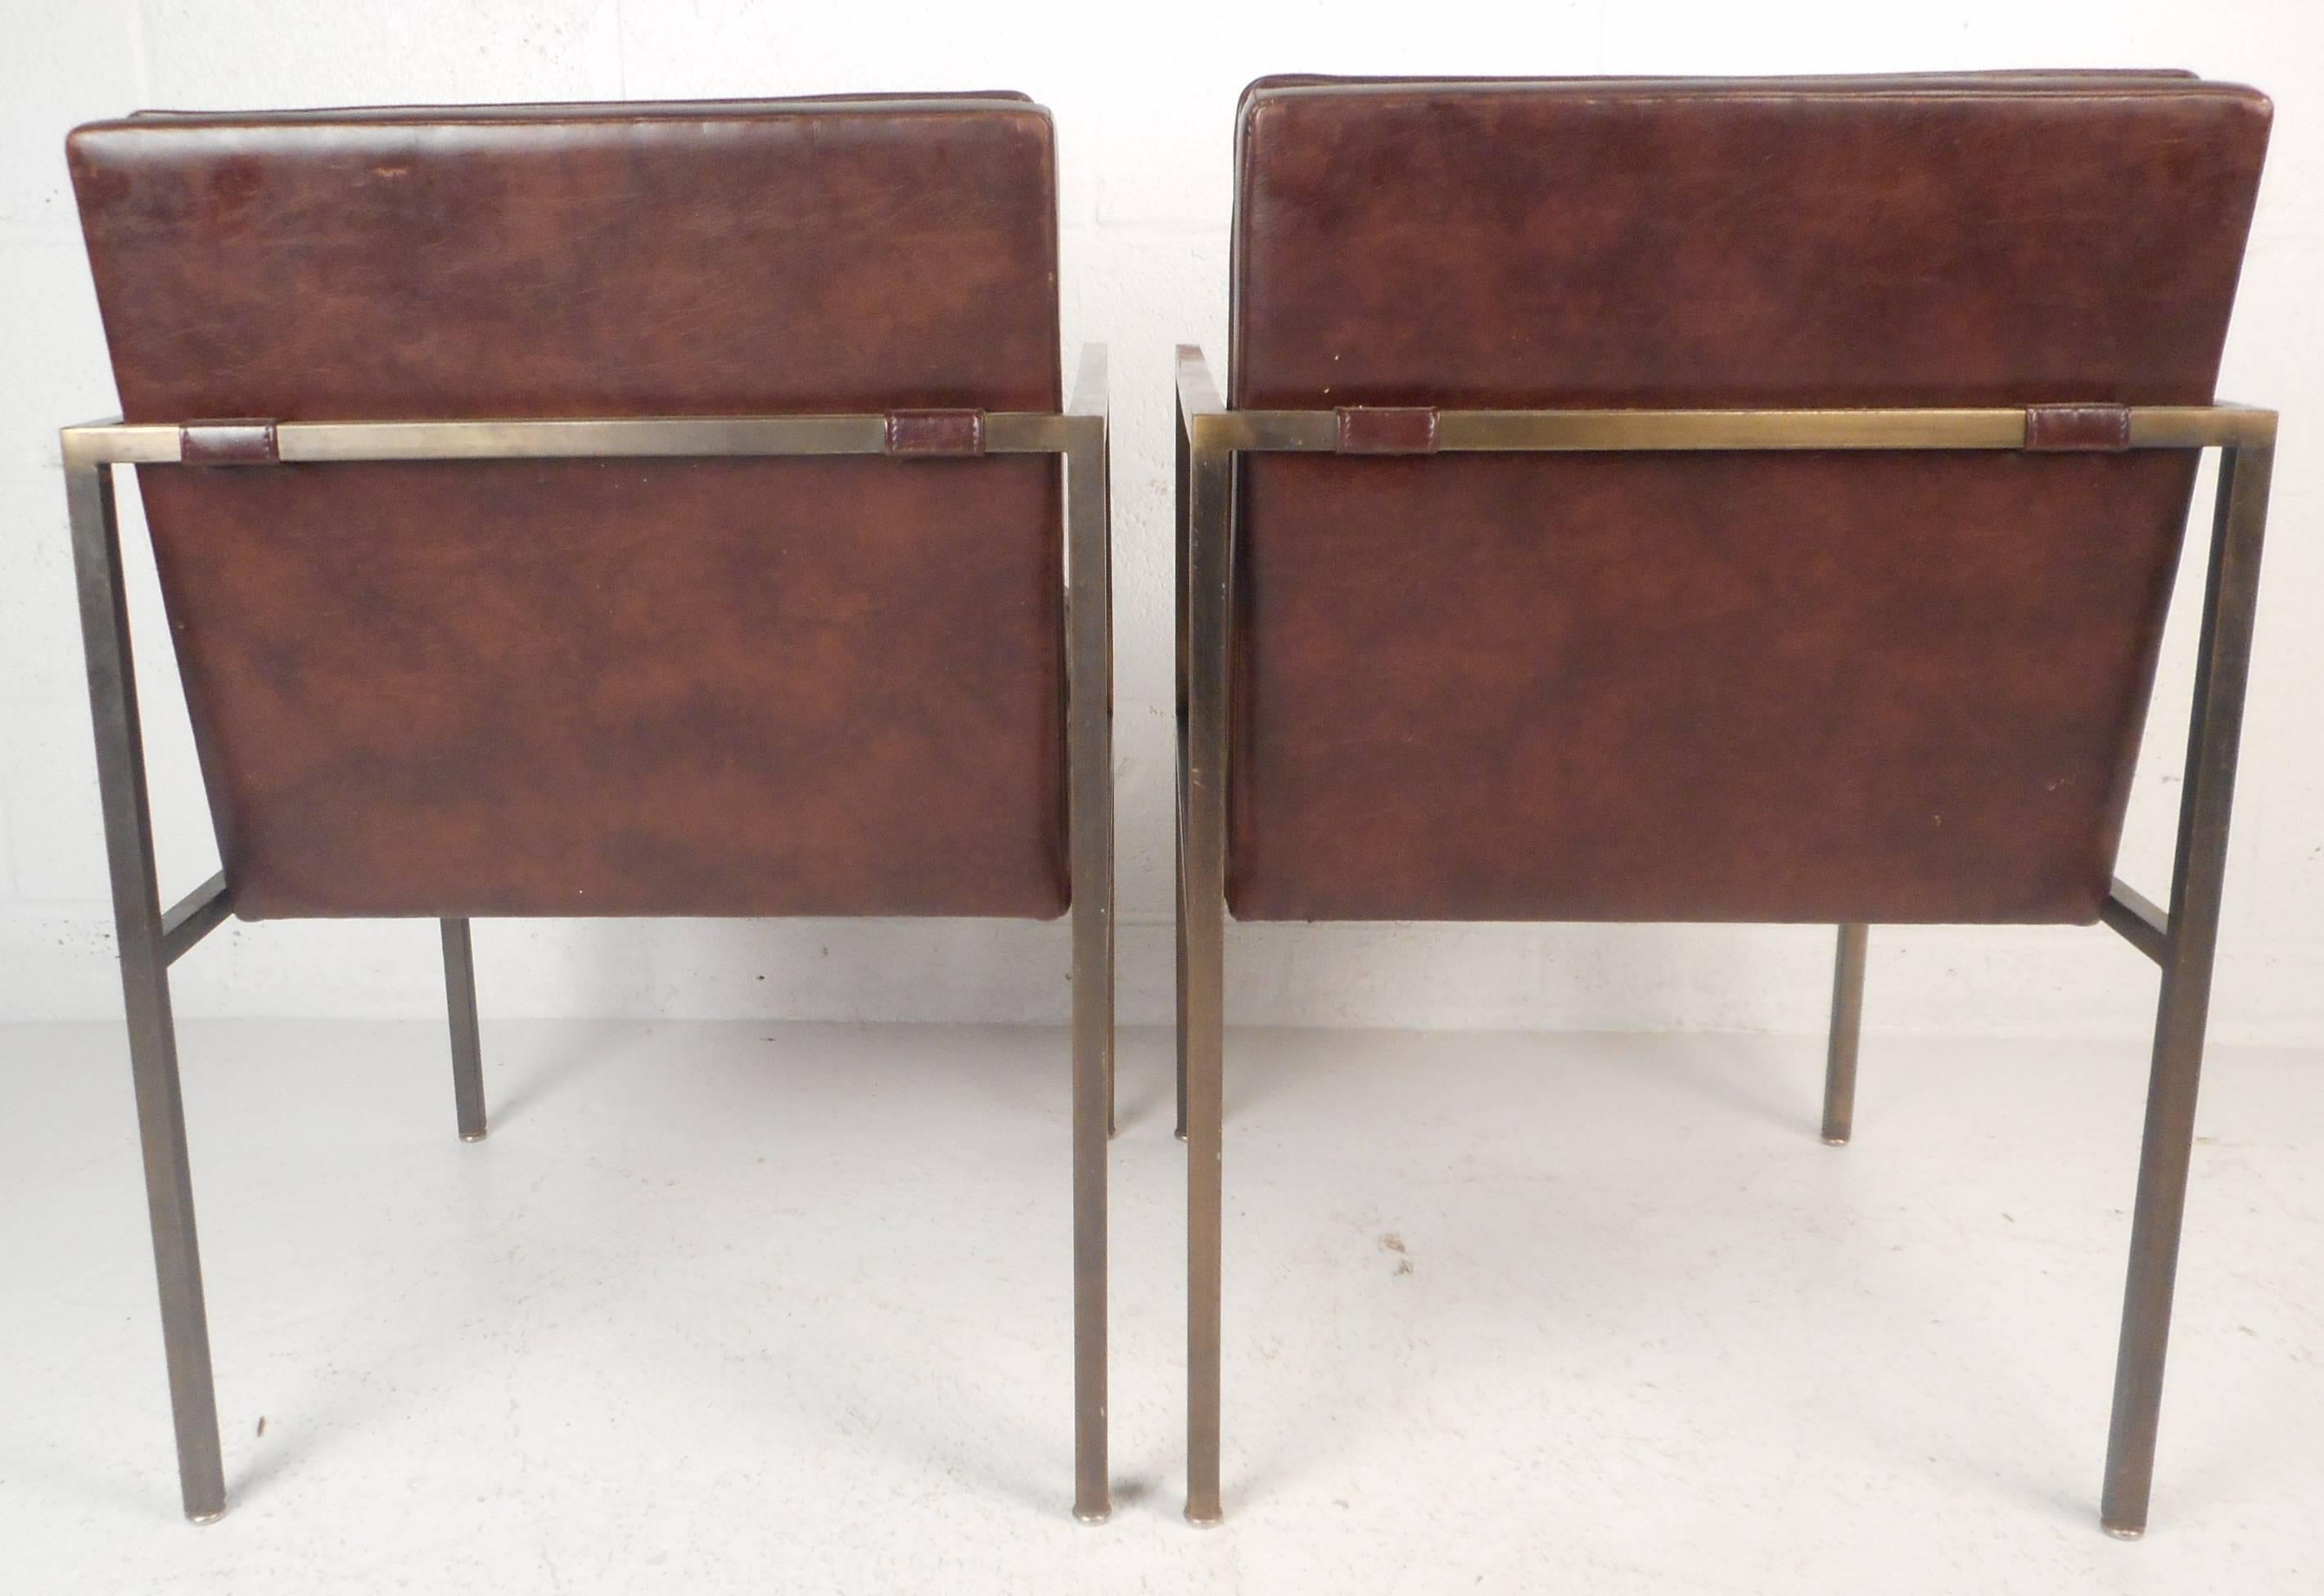 Late 20th Century Pair of Mid-Century Modern Brass and Vinyl Armchairs by Tulip Inc